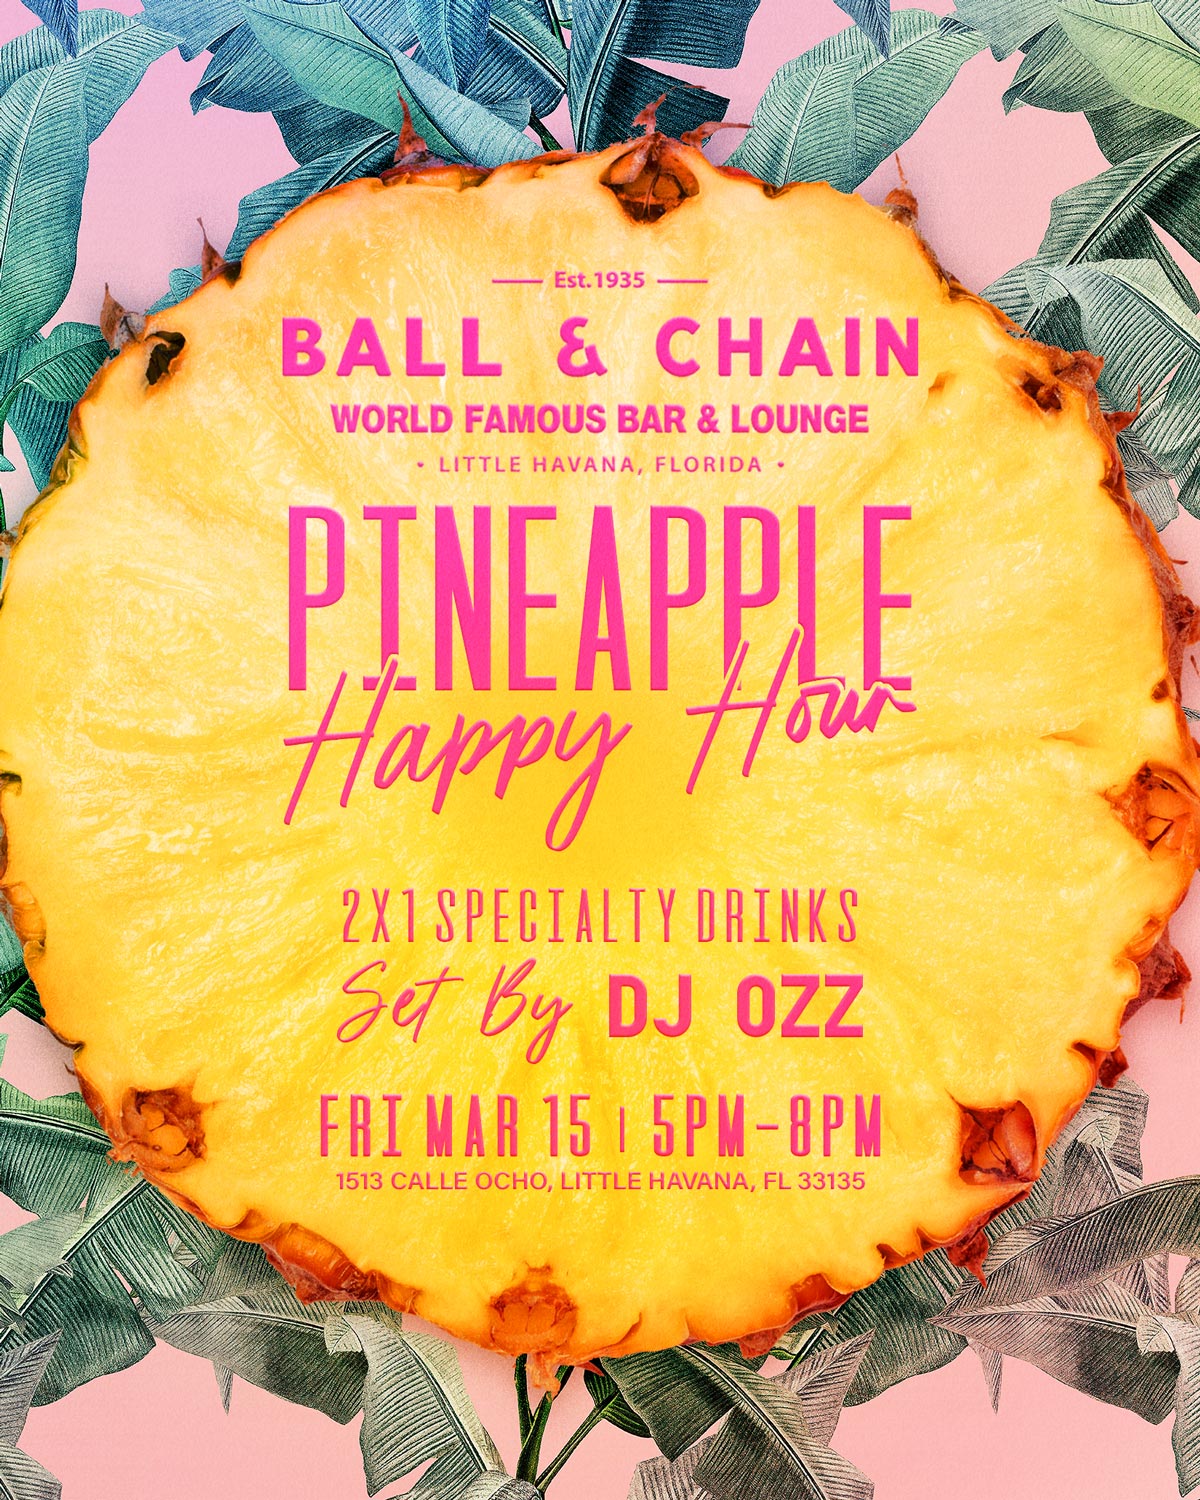 Pineapple cut in half with the event details on it.